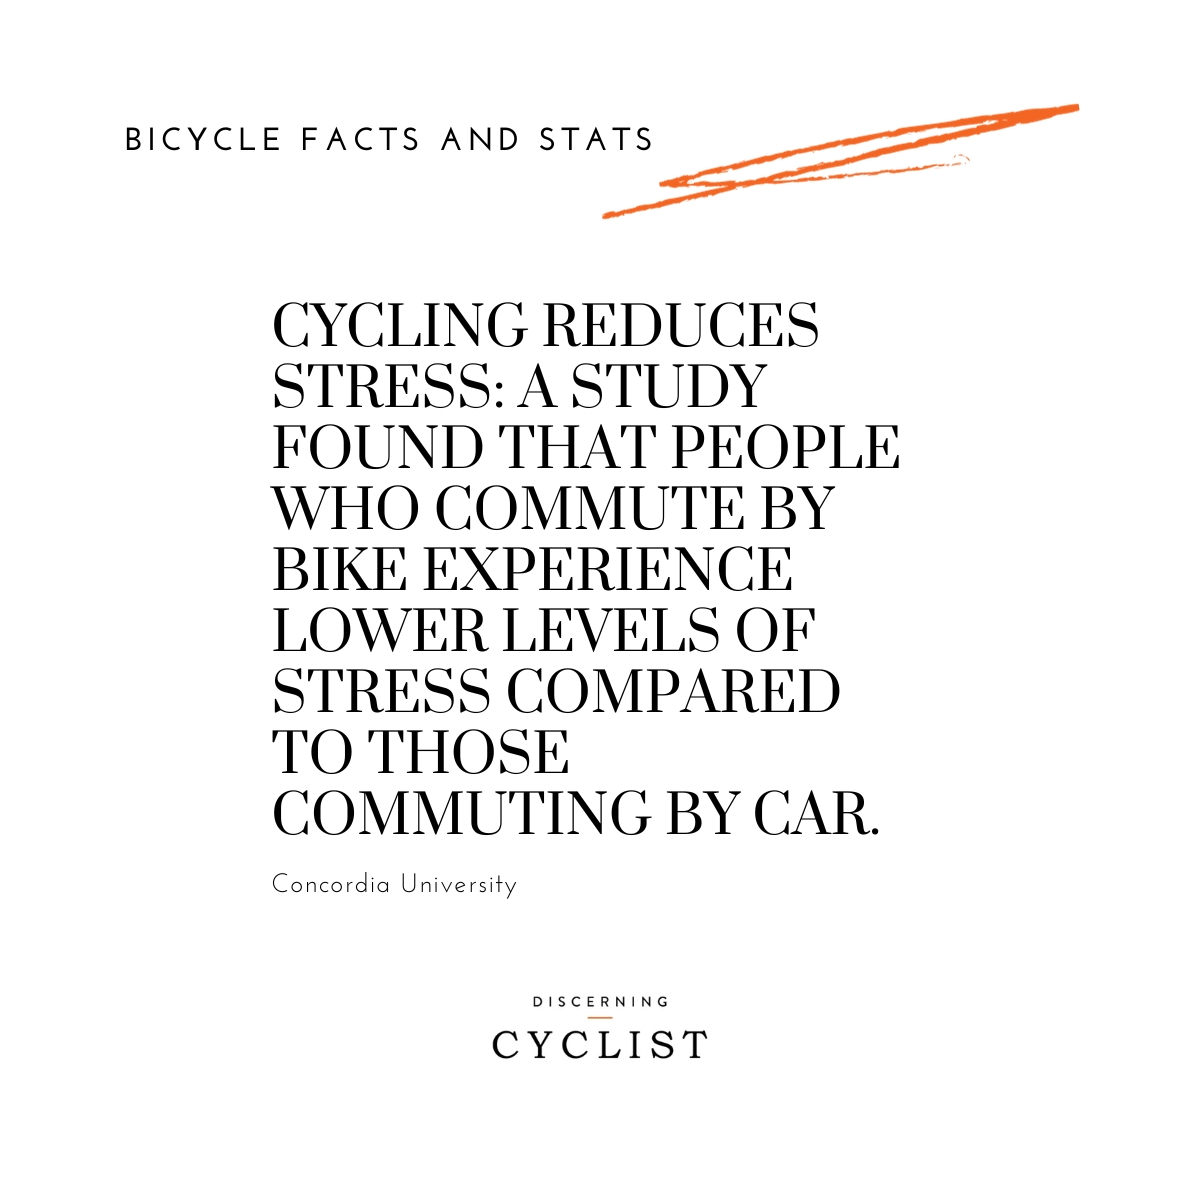 Cycling Reduces Stress: A study found that people who commute by bike experience lower levels of stress compared to those commuting by car.